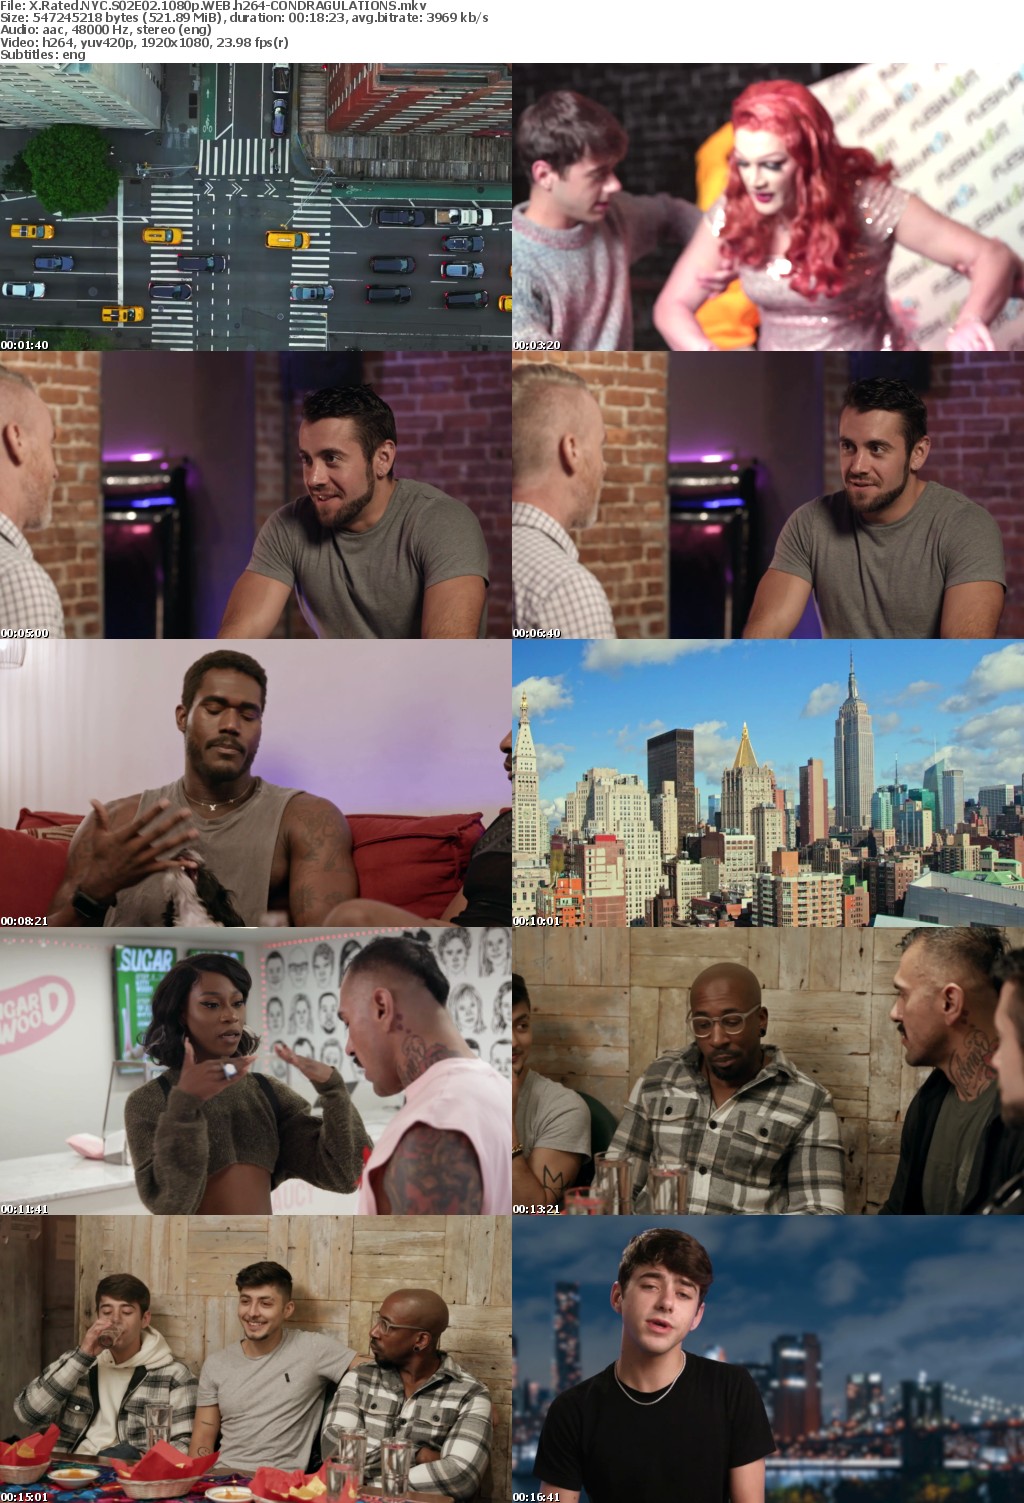 X Rated NYC S02 COMPLETE 1080p WEB h264-CONDRAGULATIONS